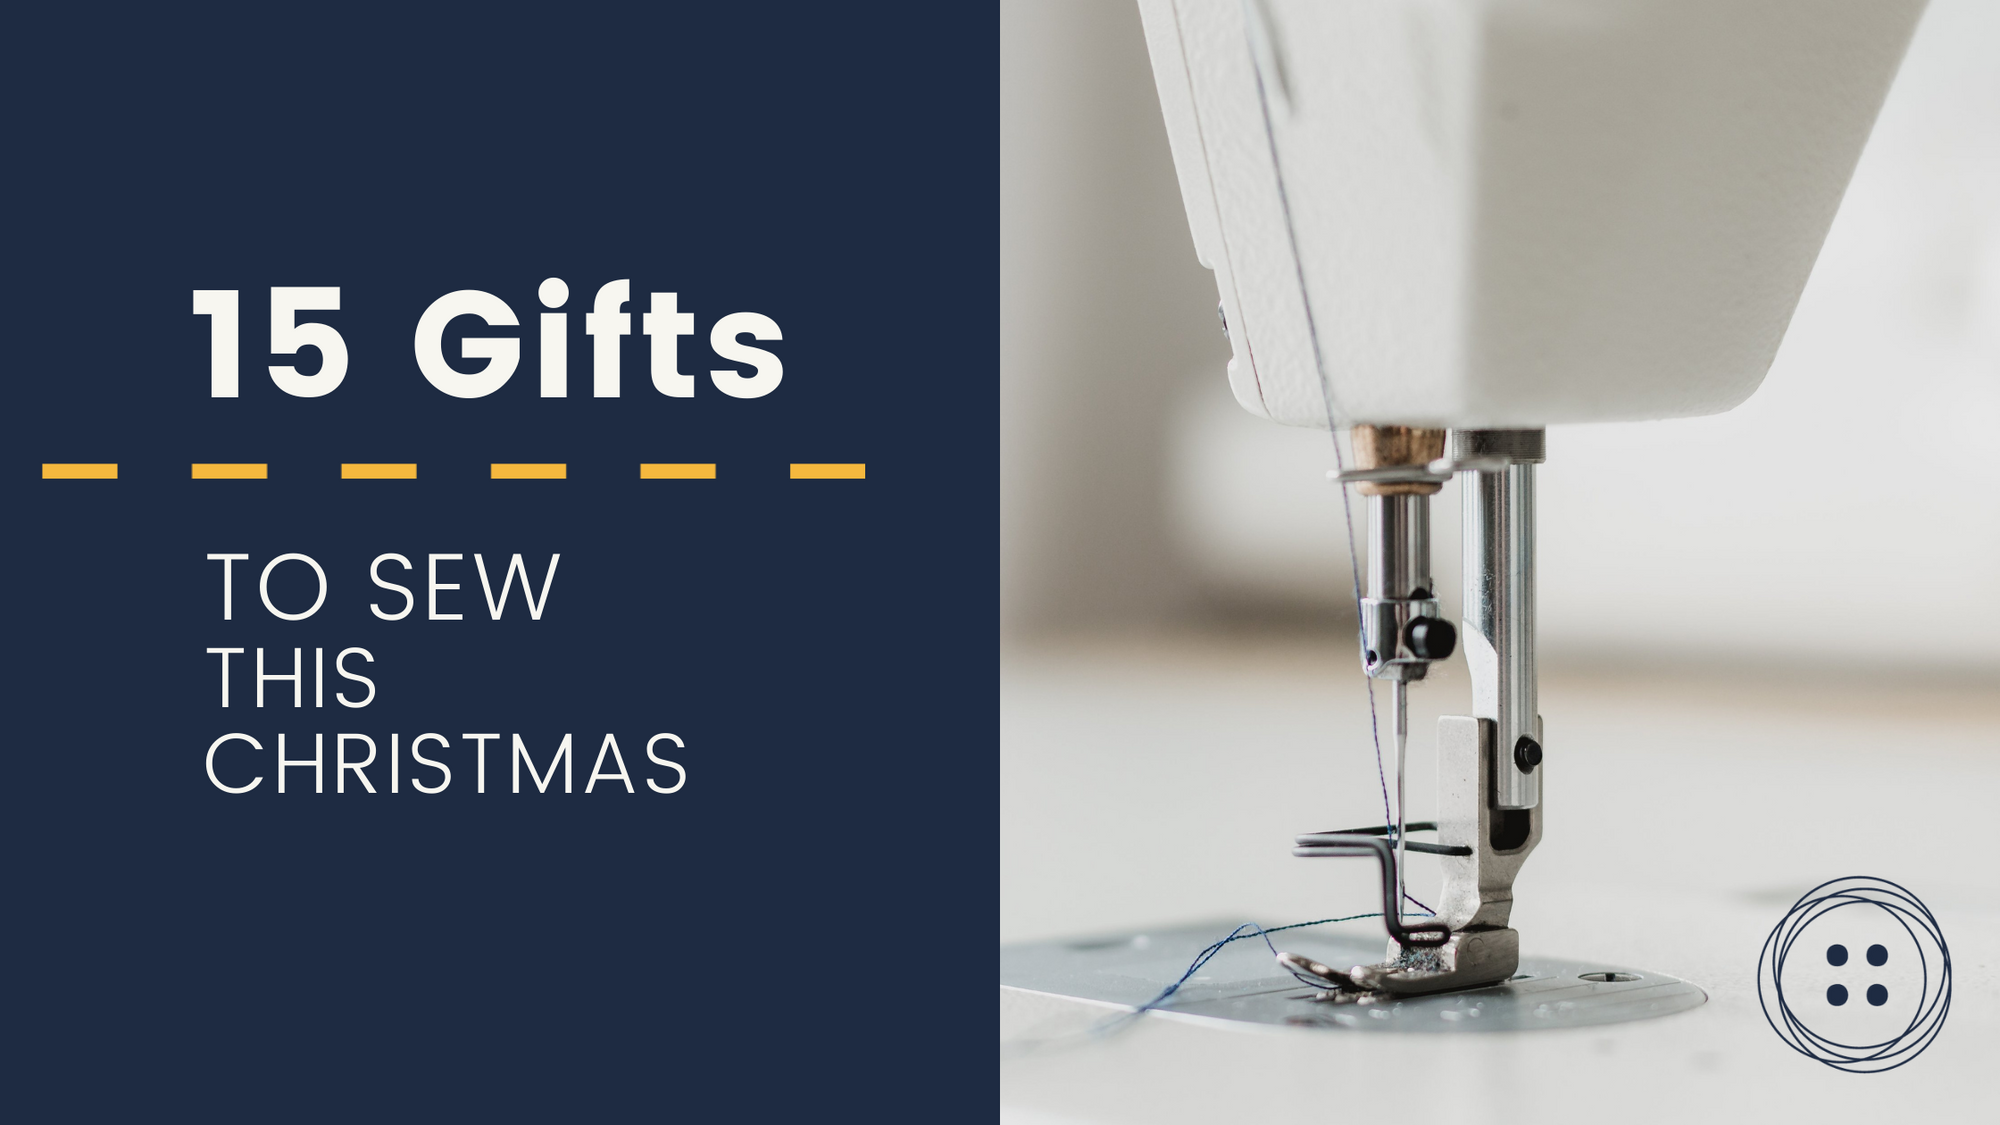 15 Gifts to sew this Christmas (2020 edition)